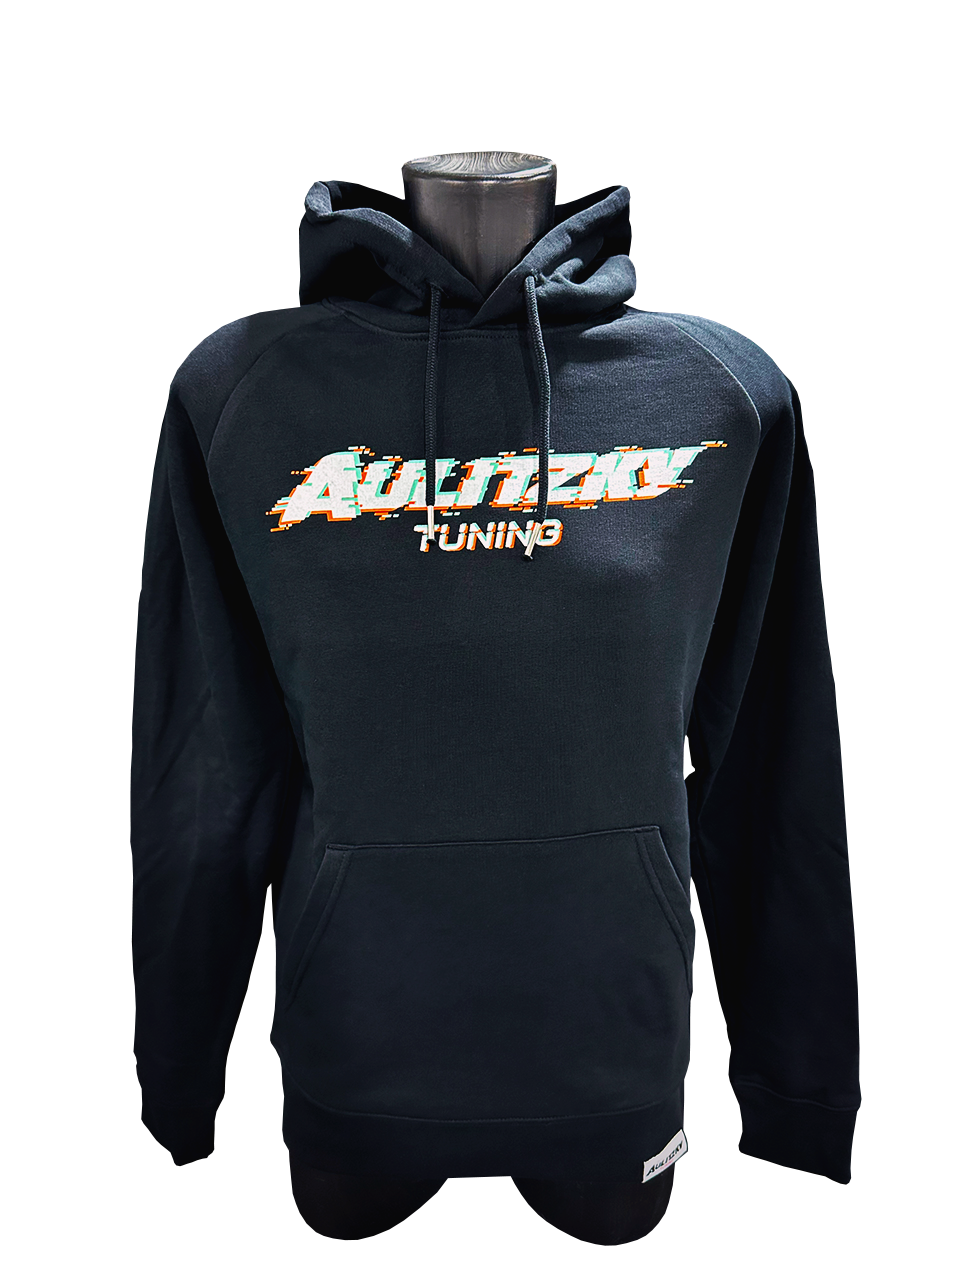 AT | Aulitzky Tuning | Hoodie | black glitch